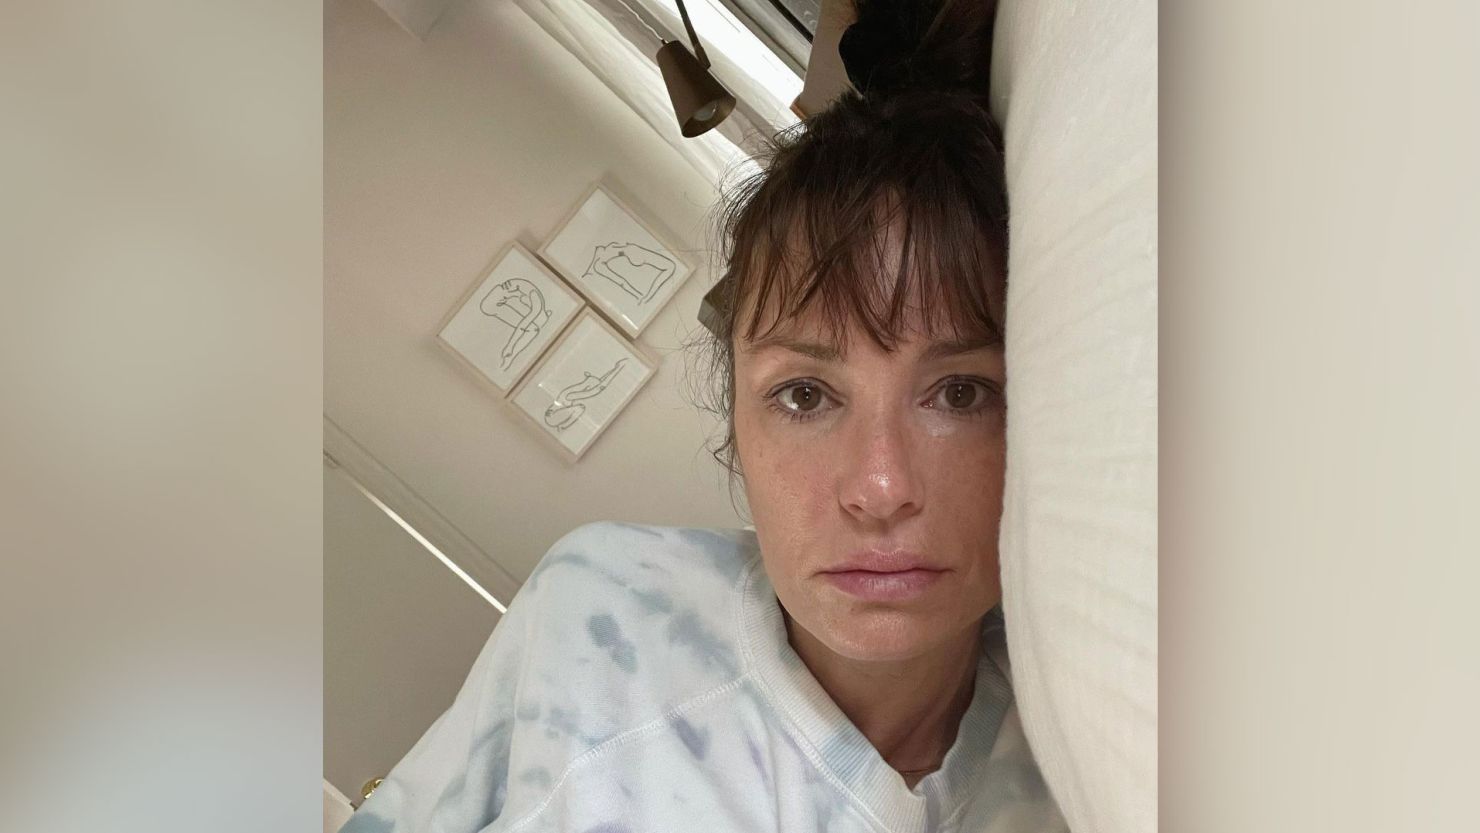 Catt Sadler posted that she has gotten sick with Covid-19 after being fully vaccinated. 